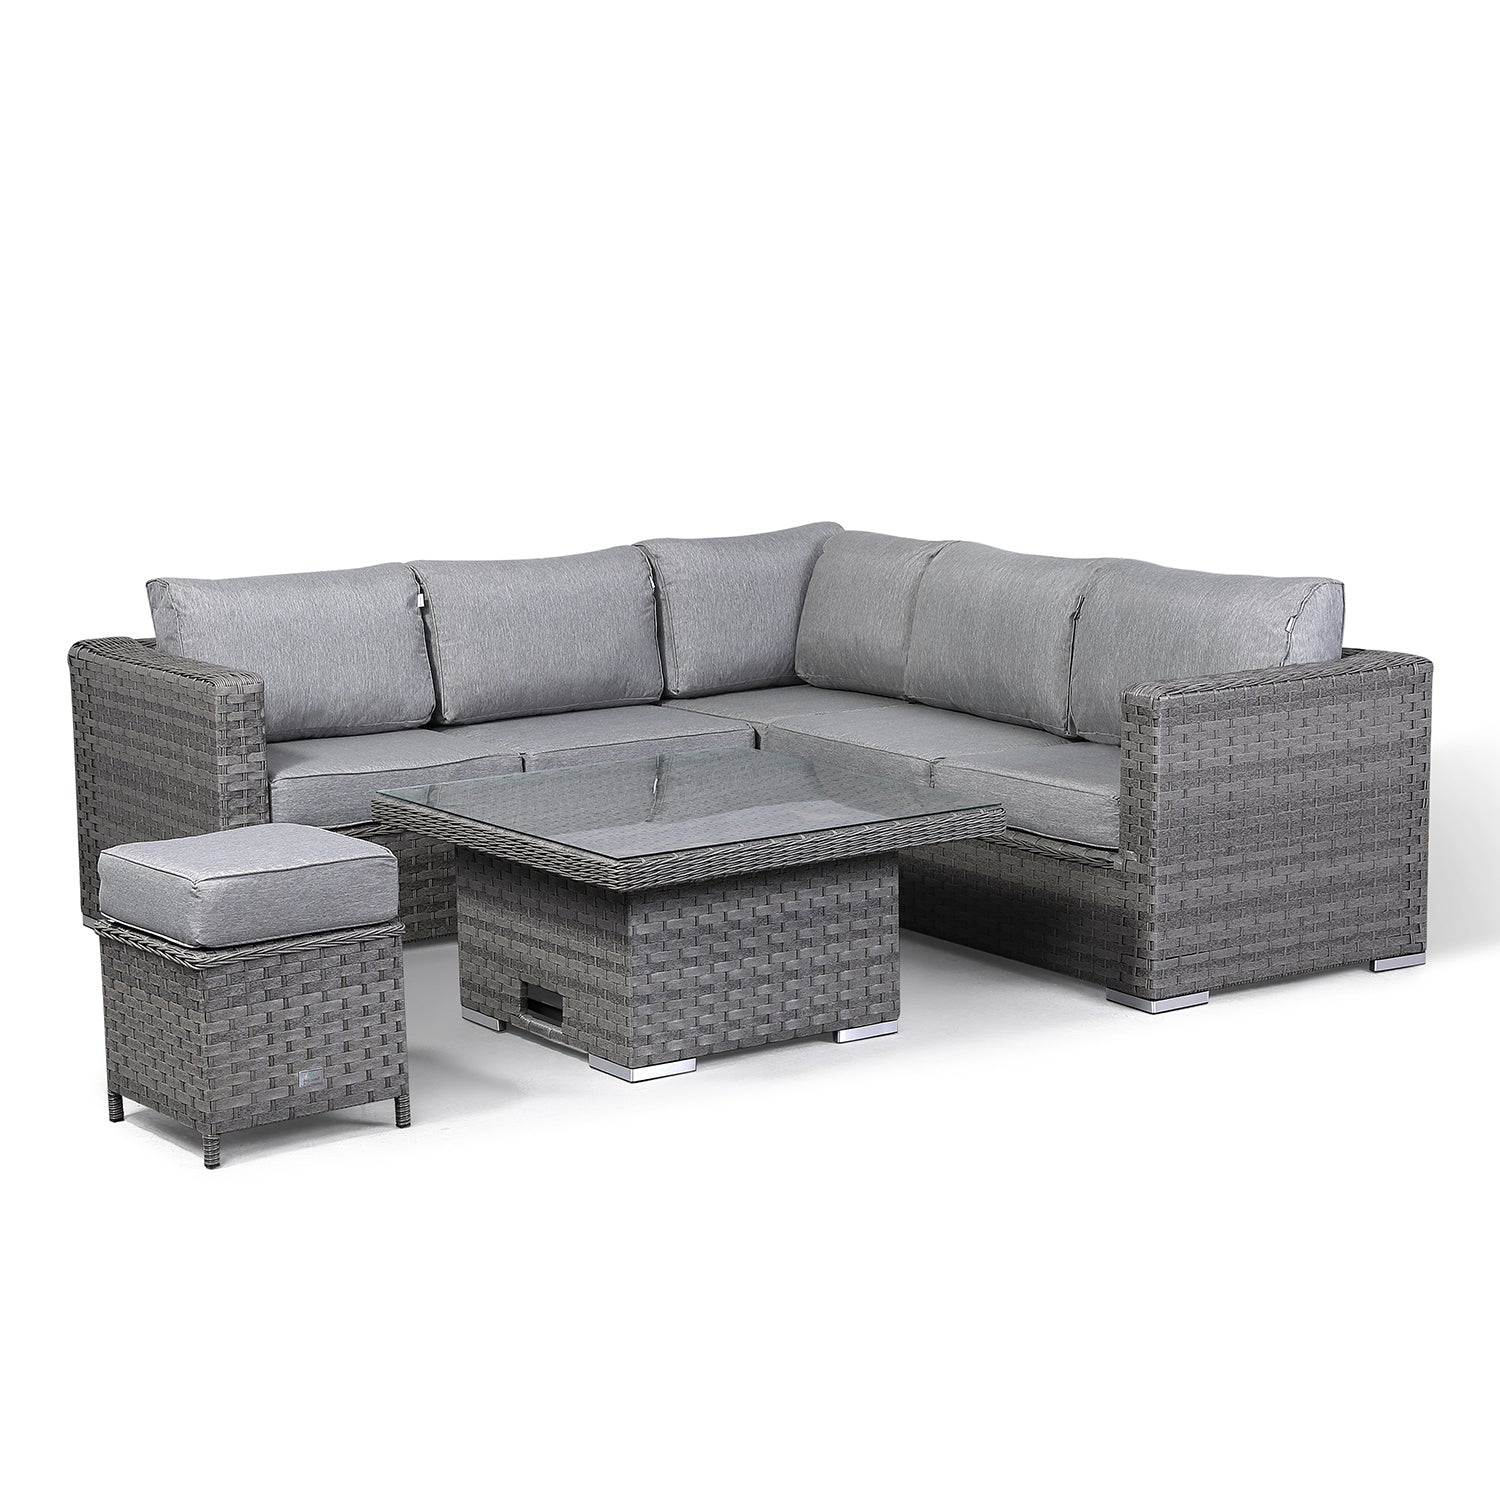 Ascot Square Corner Sofa Set with Square Rising Table in Large Grey weave